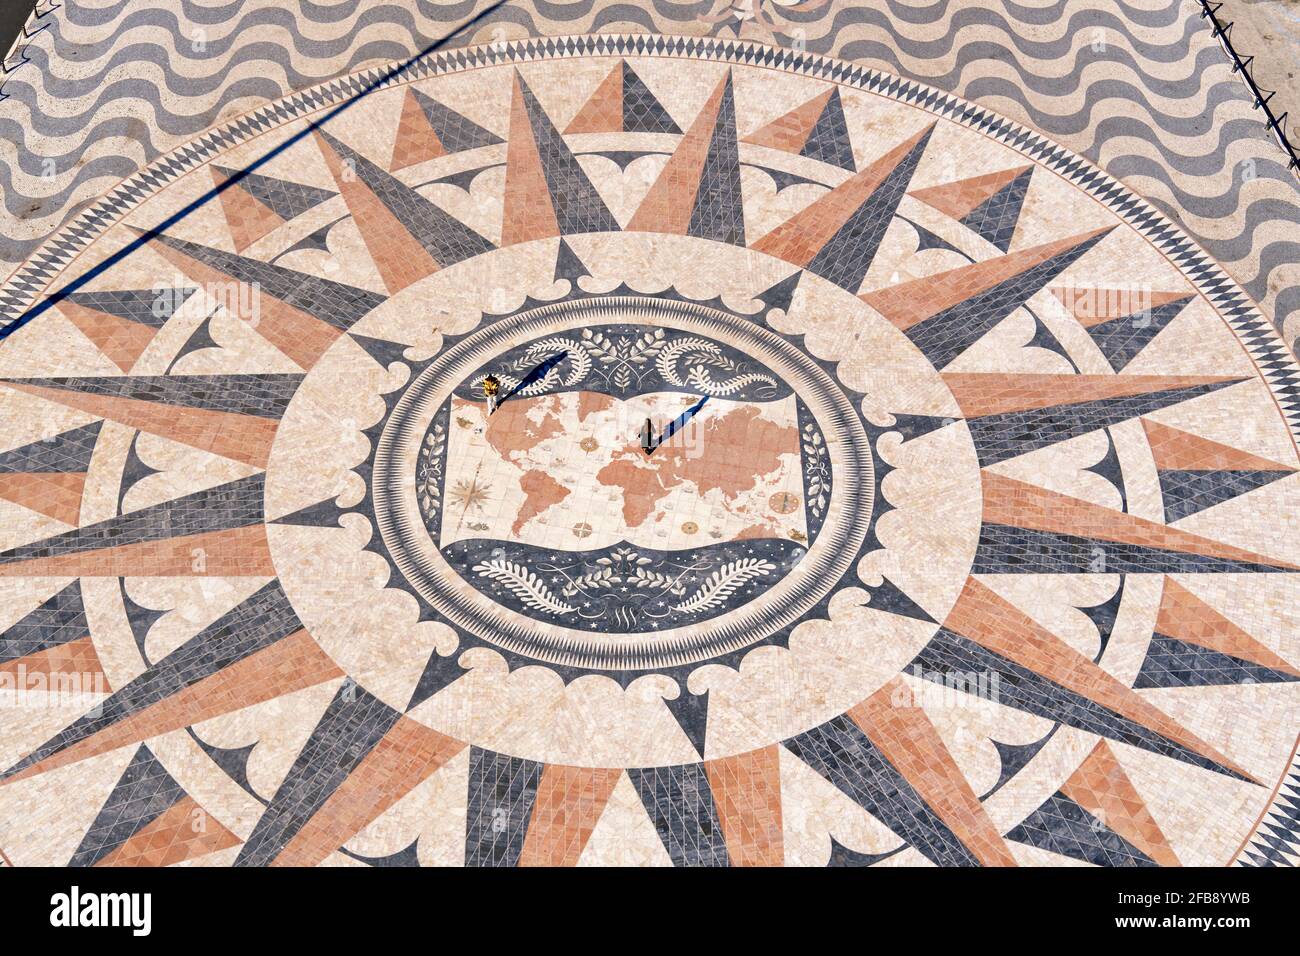 The compass pavement in front of the Monument of the Discoveries. Lisbon, Portugal Stock Photo